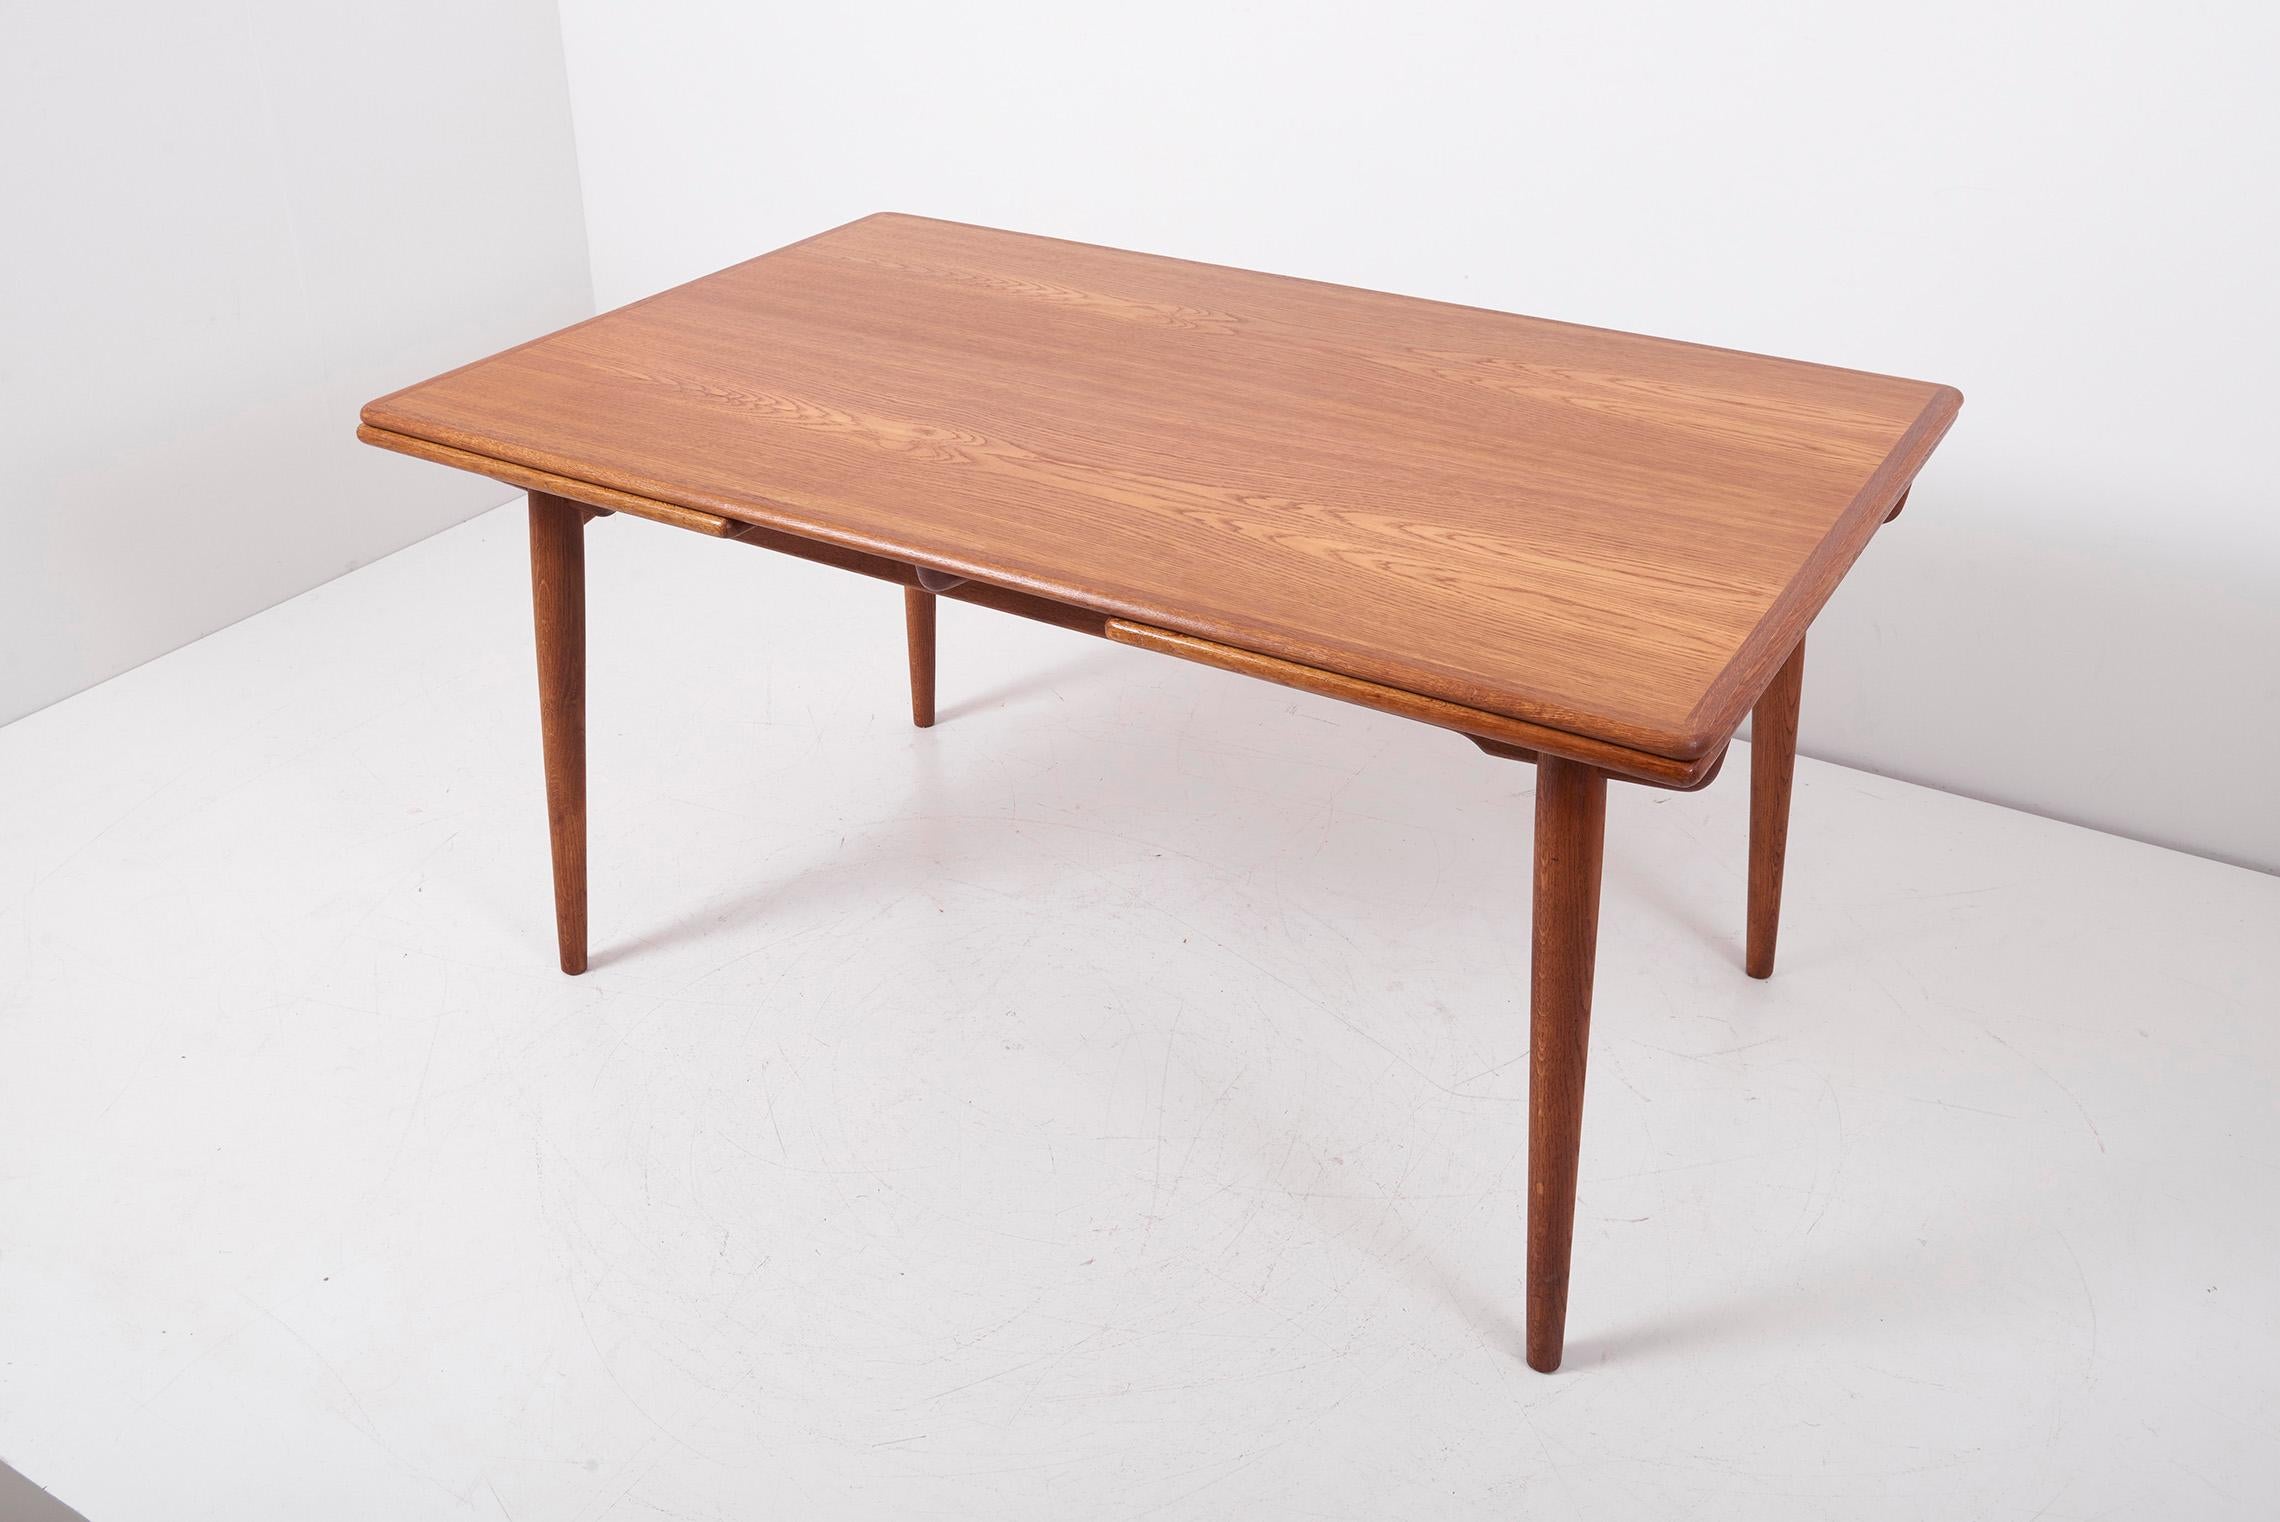 Hans Wegner AT-312 dining table in oak for Andreas Tuck, Denmark, 1950s
The table has two extensions and is in very good condition.
Width indicated in the measurement refers to the table extended; the leaves are 54.5 cm.